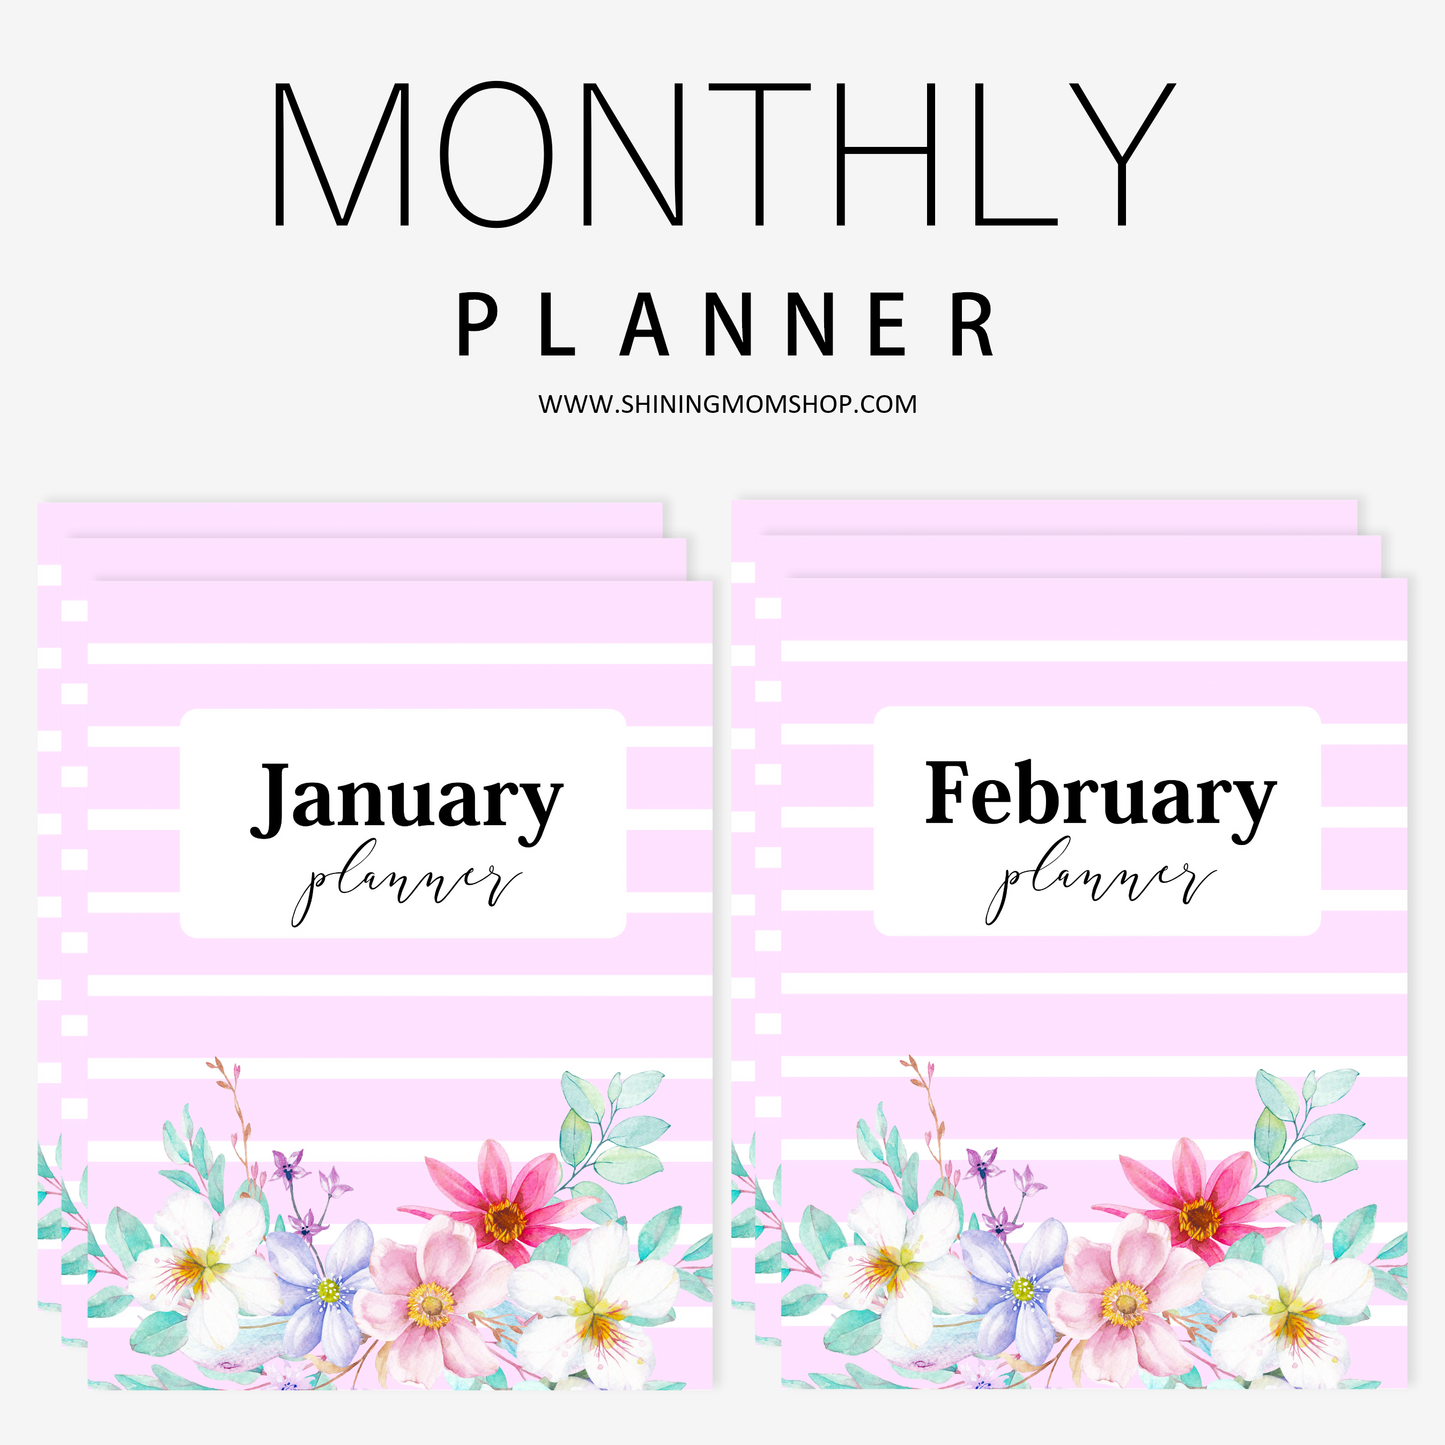 Monthly Planner: So Beautiful!